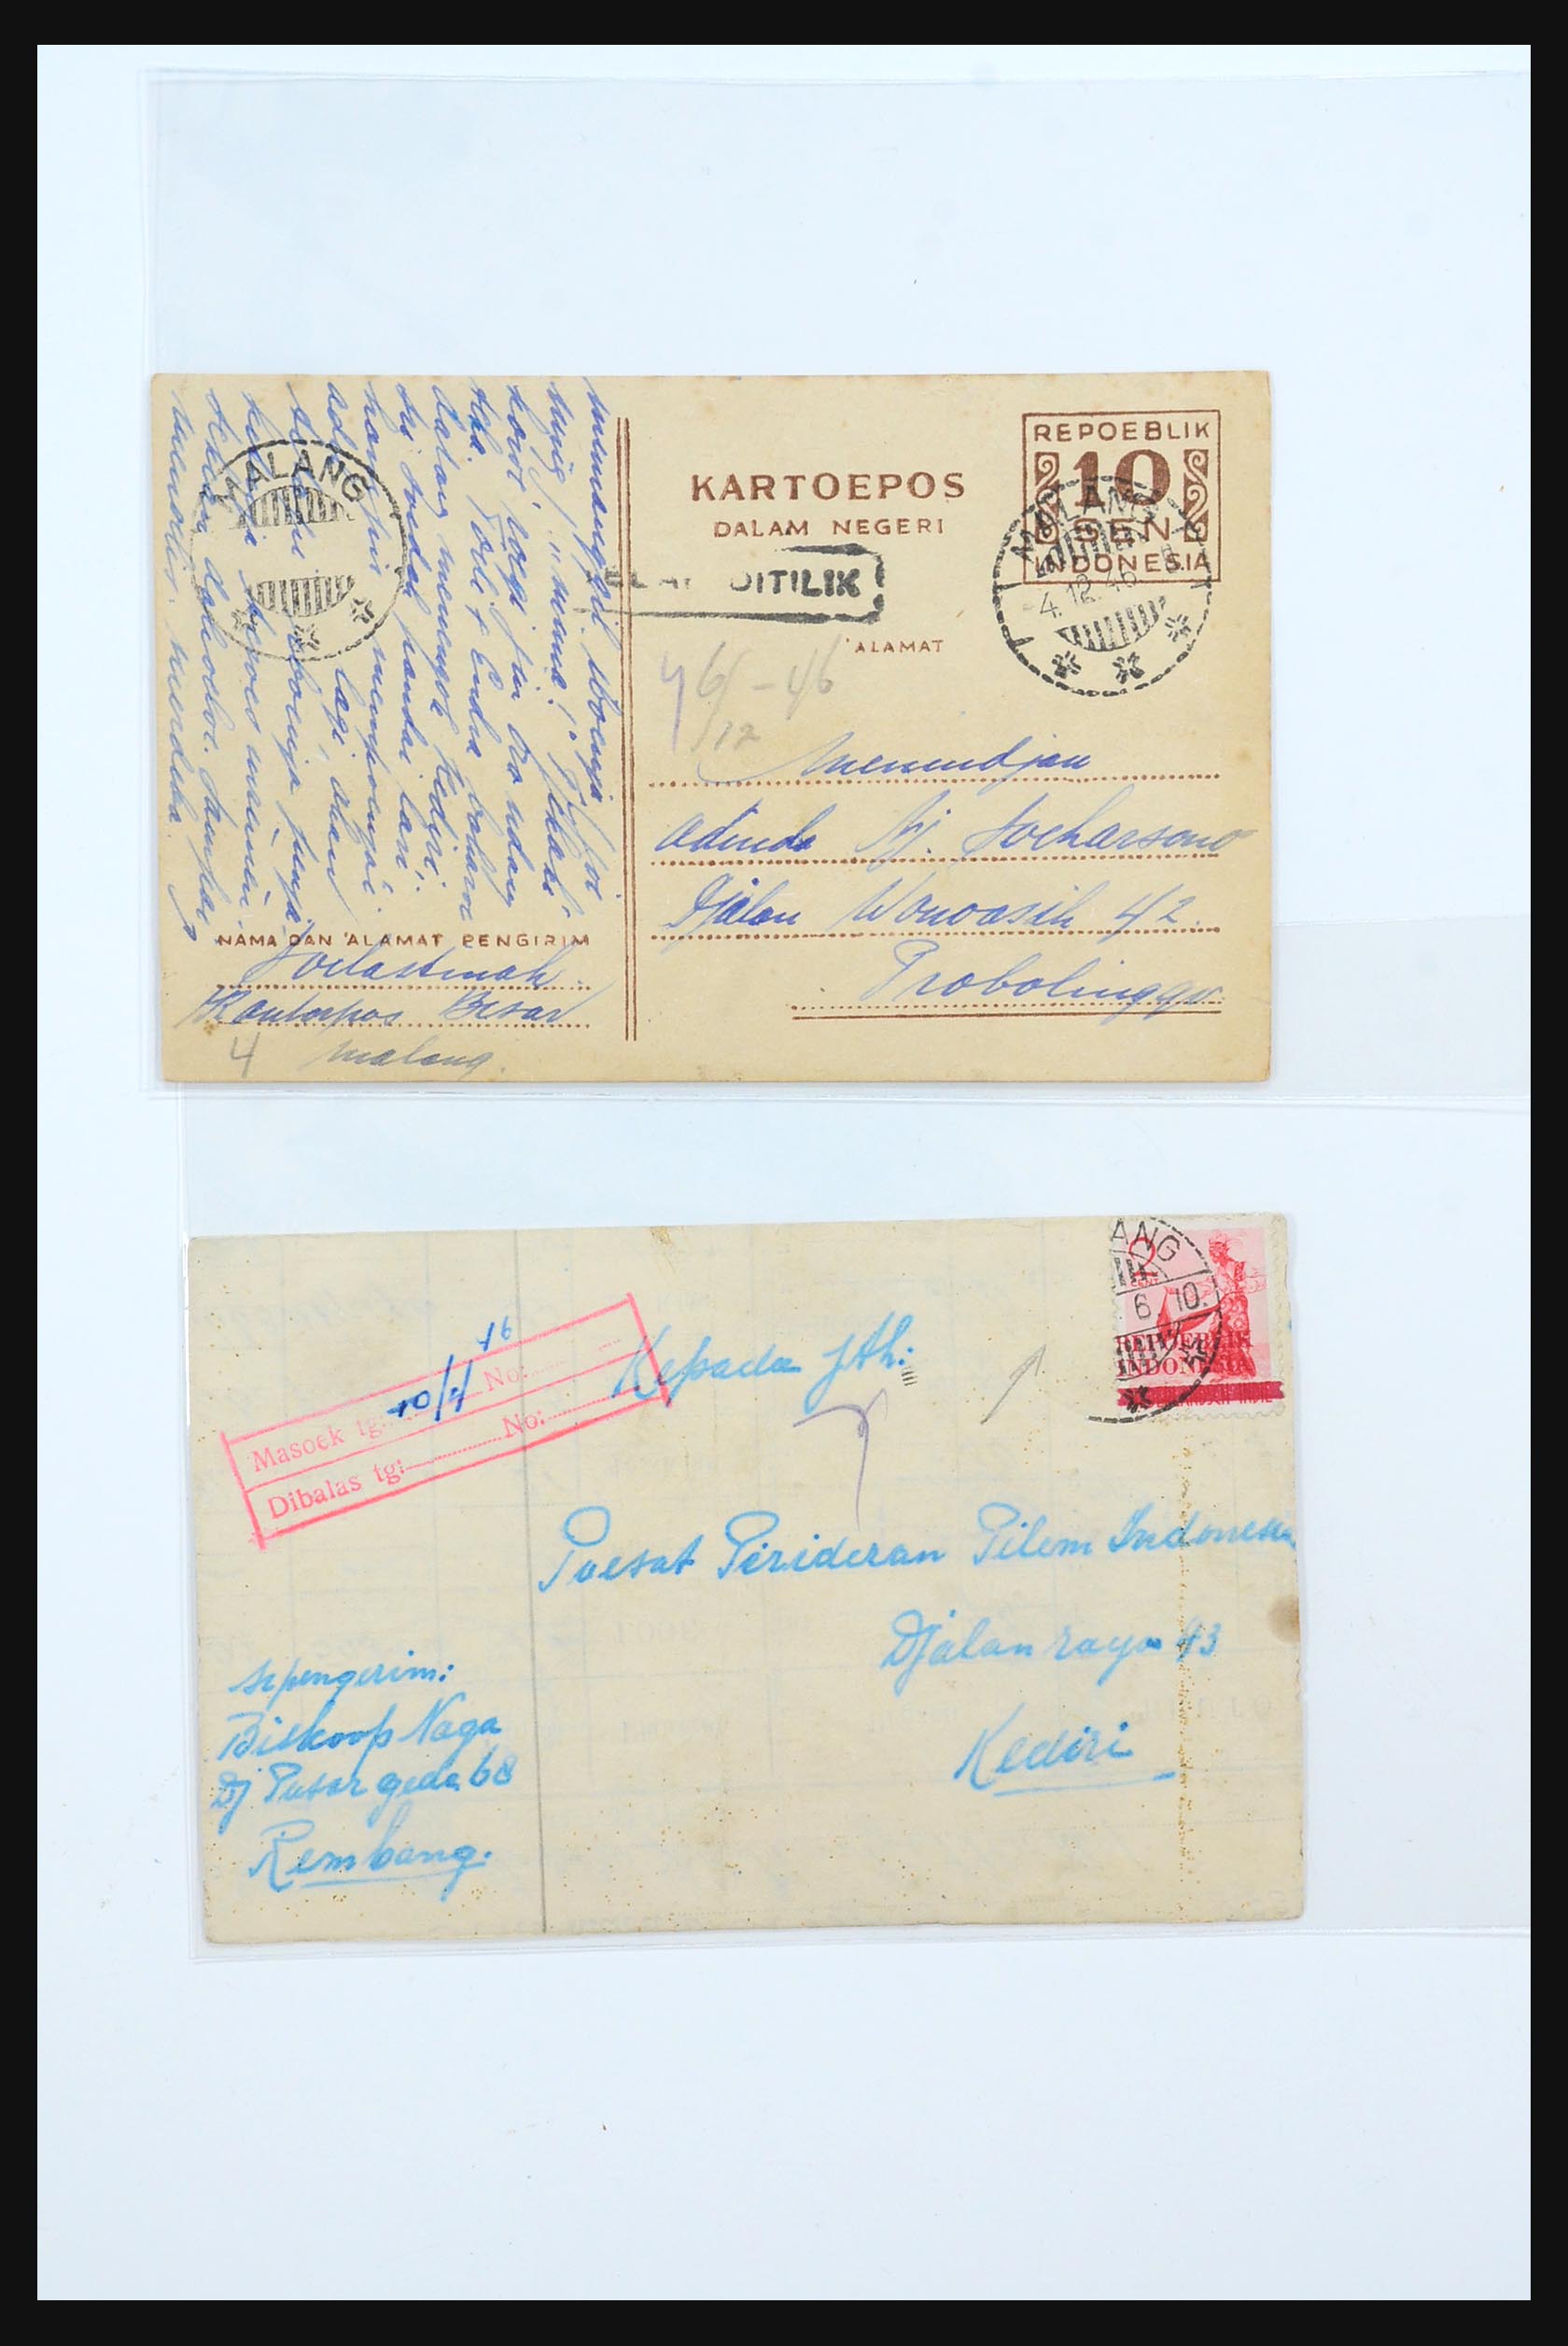 31362 018 - 31362 Netherlands Indies Japanese occupation covers 1942-1945.